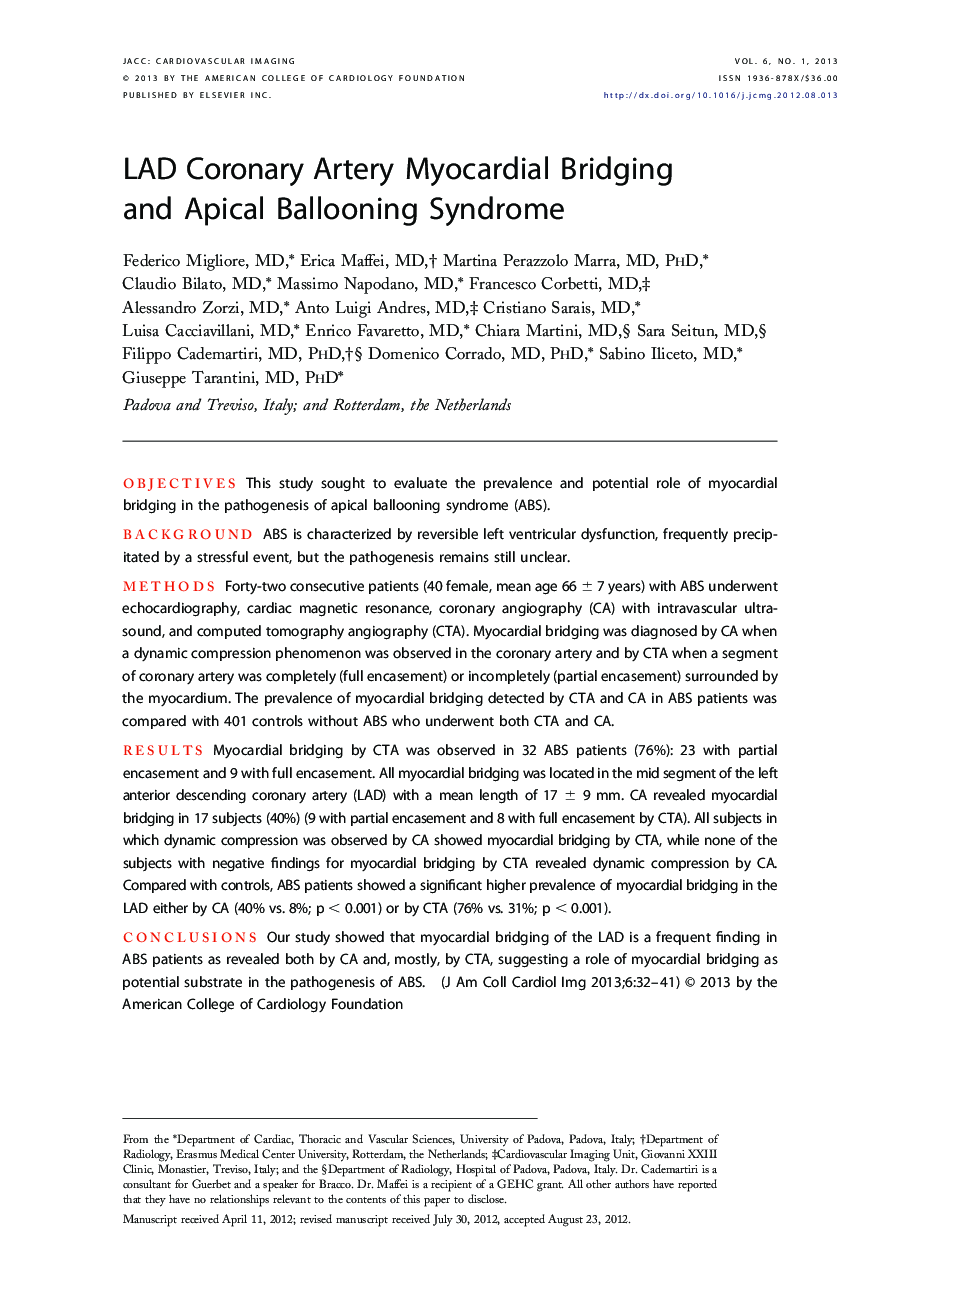 LAD Coronary Artery Myocardial Bridging and Apical Ballooning Syndrome 